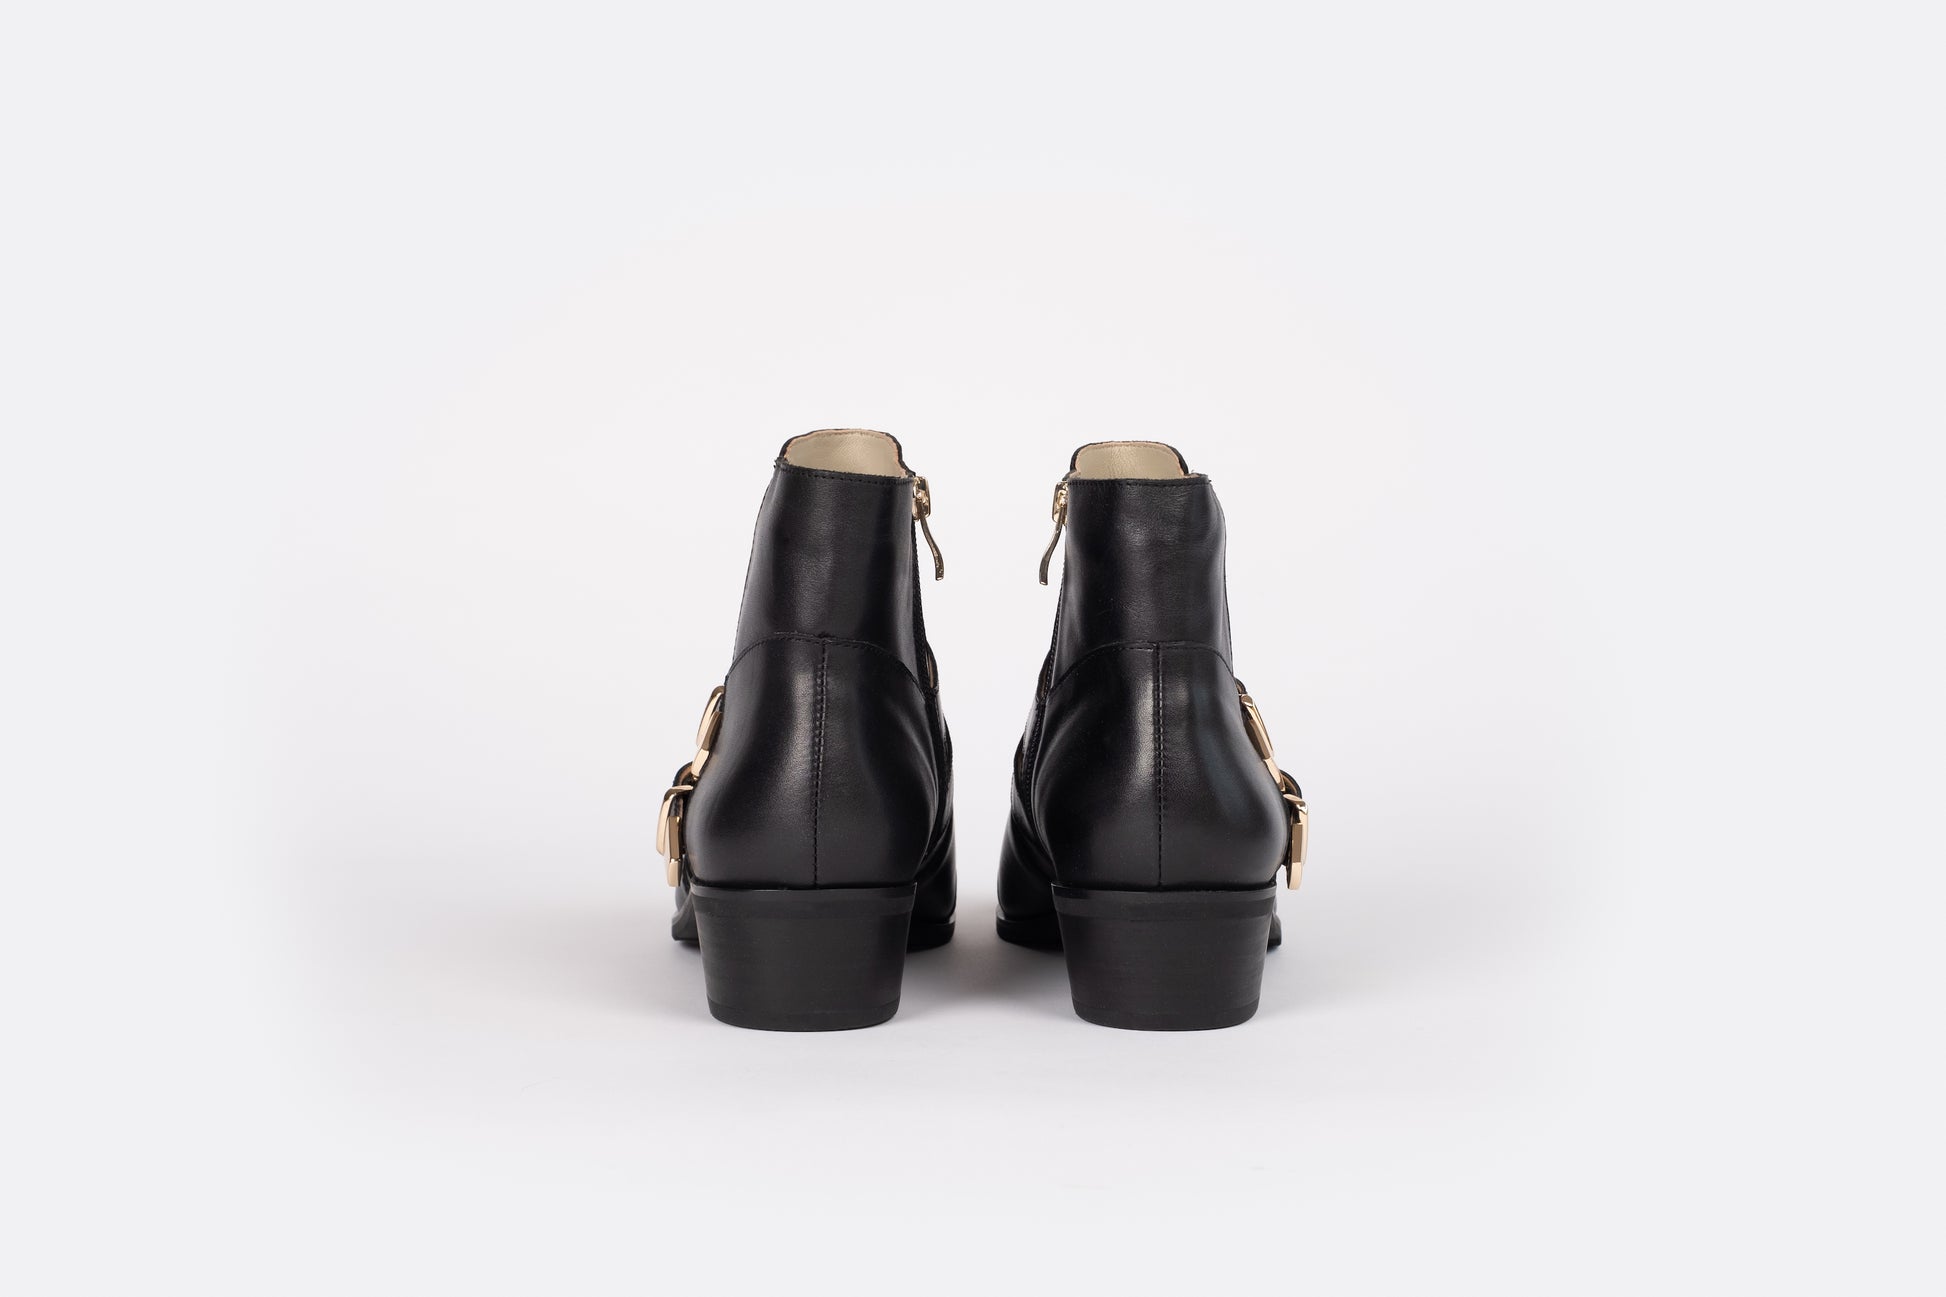 A back profile of the Otto + Ivy black Tilly Boot, a western style ankle boot for tall women with large feet, featuring gold buckles and hardware.